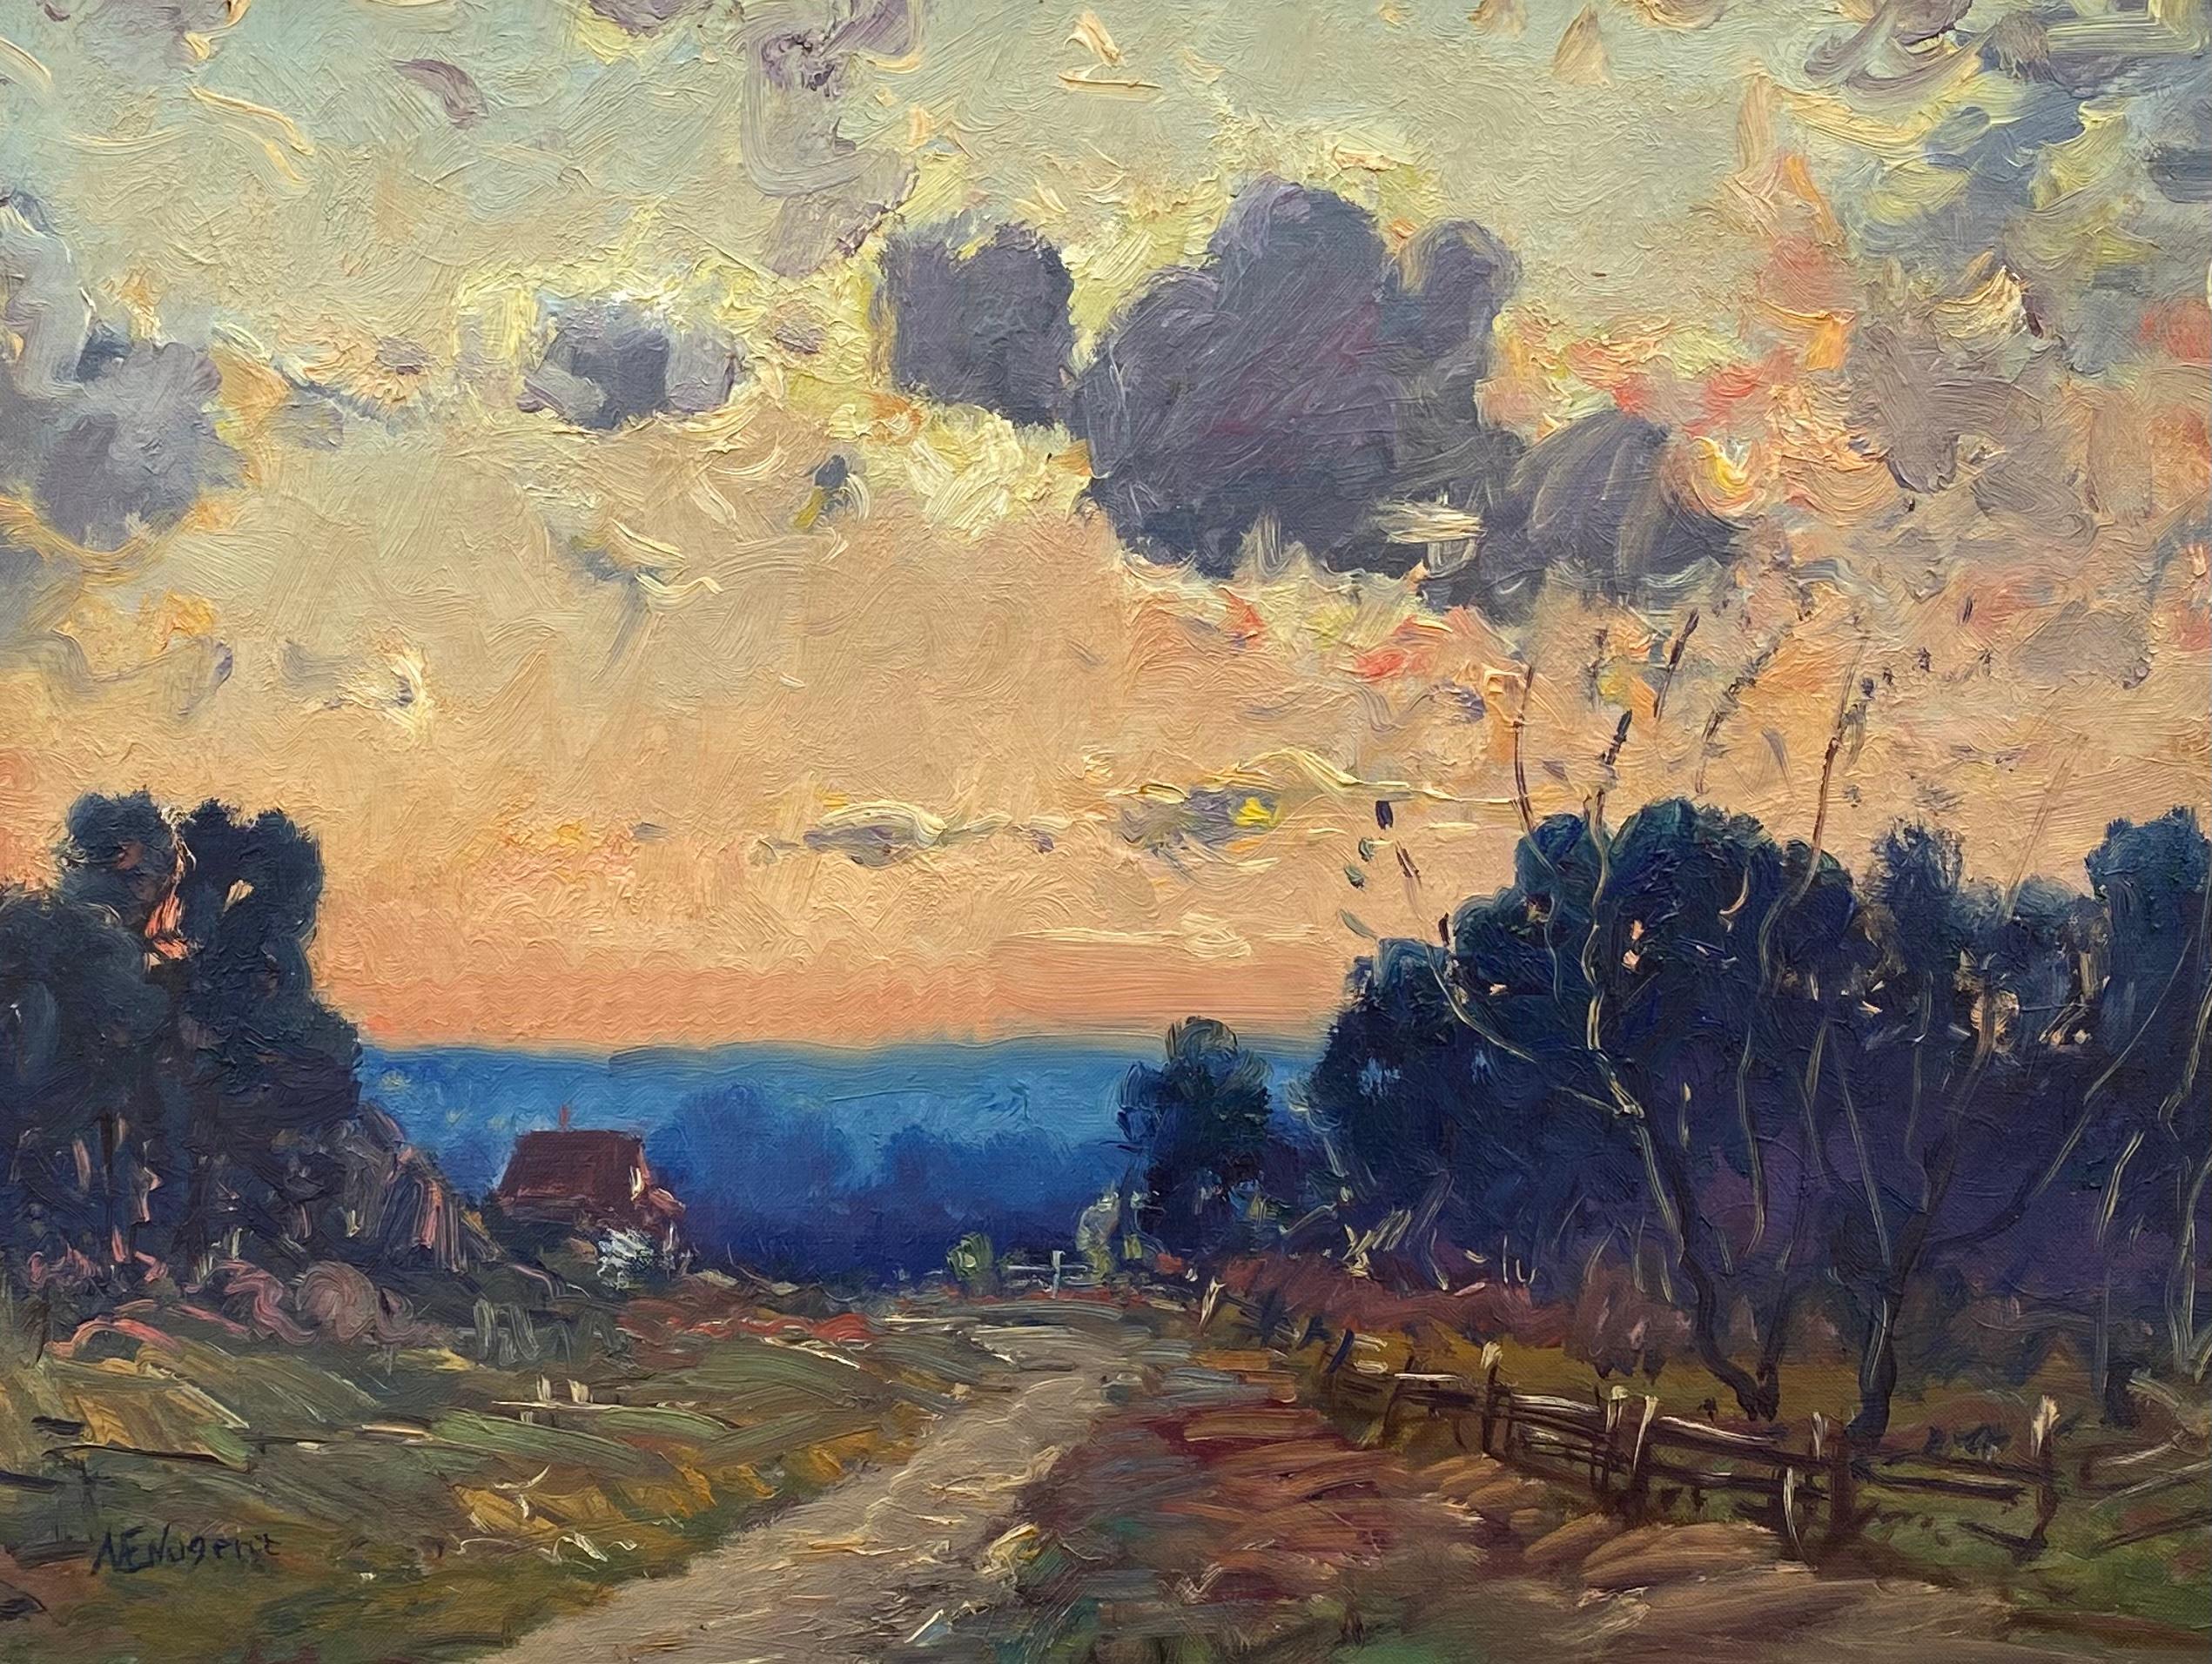 Original oil on artist canvas board of a sunset on a rural country lane by the American artist, Margaret E. Nugent. Signed lower left and verso as well. Circa 1940. Condition of painting is excellent.  Overall framed measurements are 18.5 by 22.5